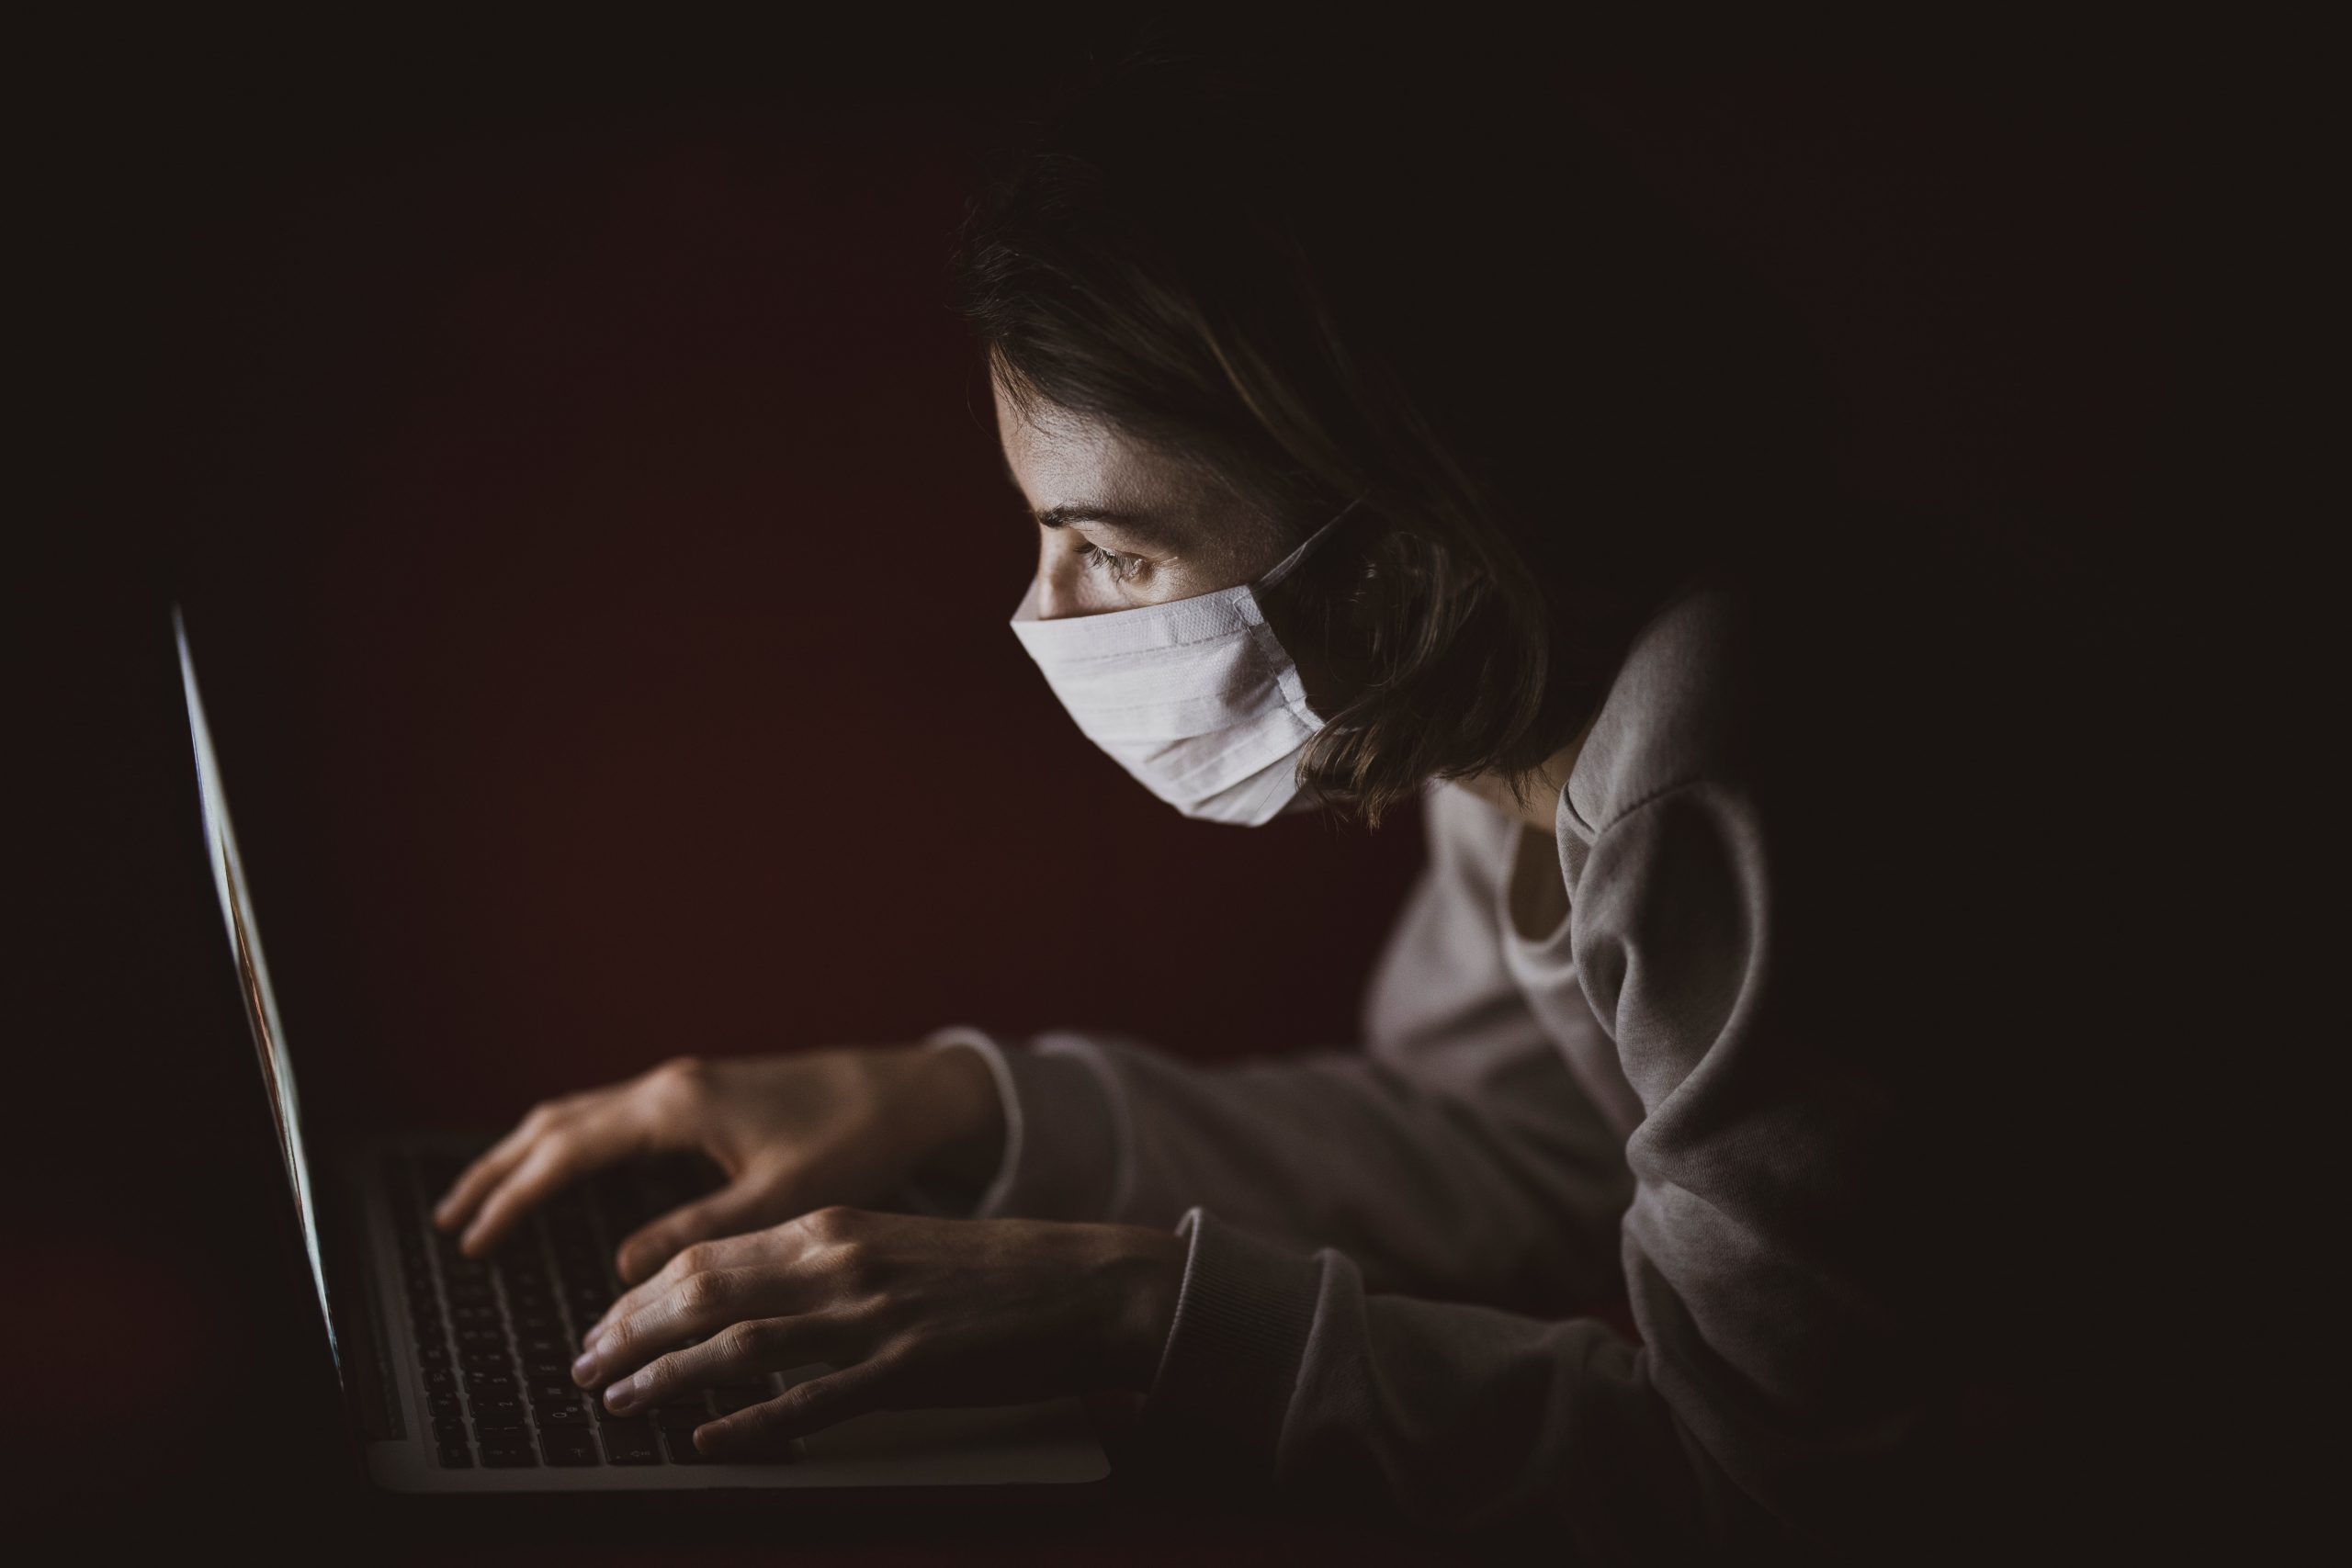 A person wearing a white face mask hunches over a laptop in the dark. The only light is coming from the laptop screen.